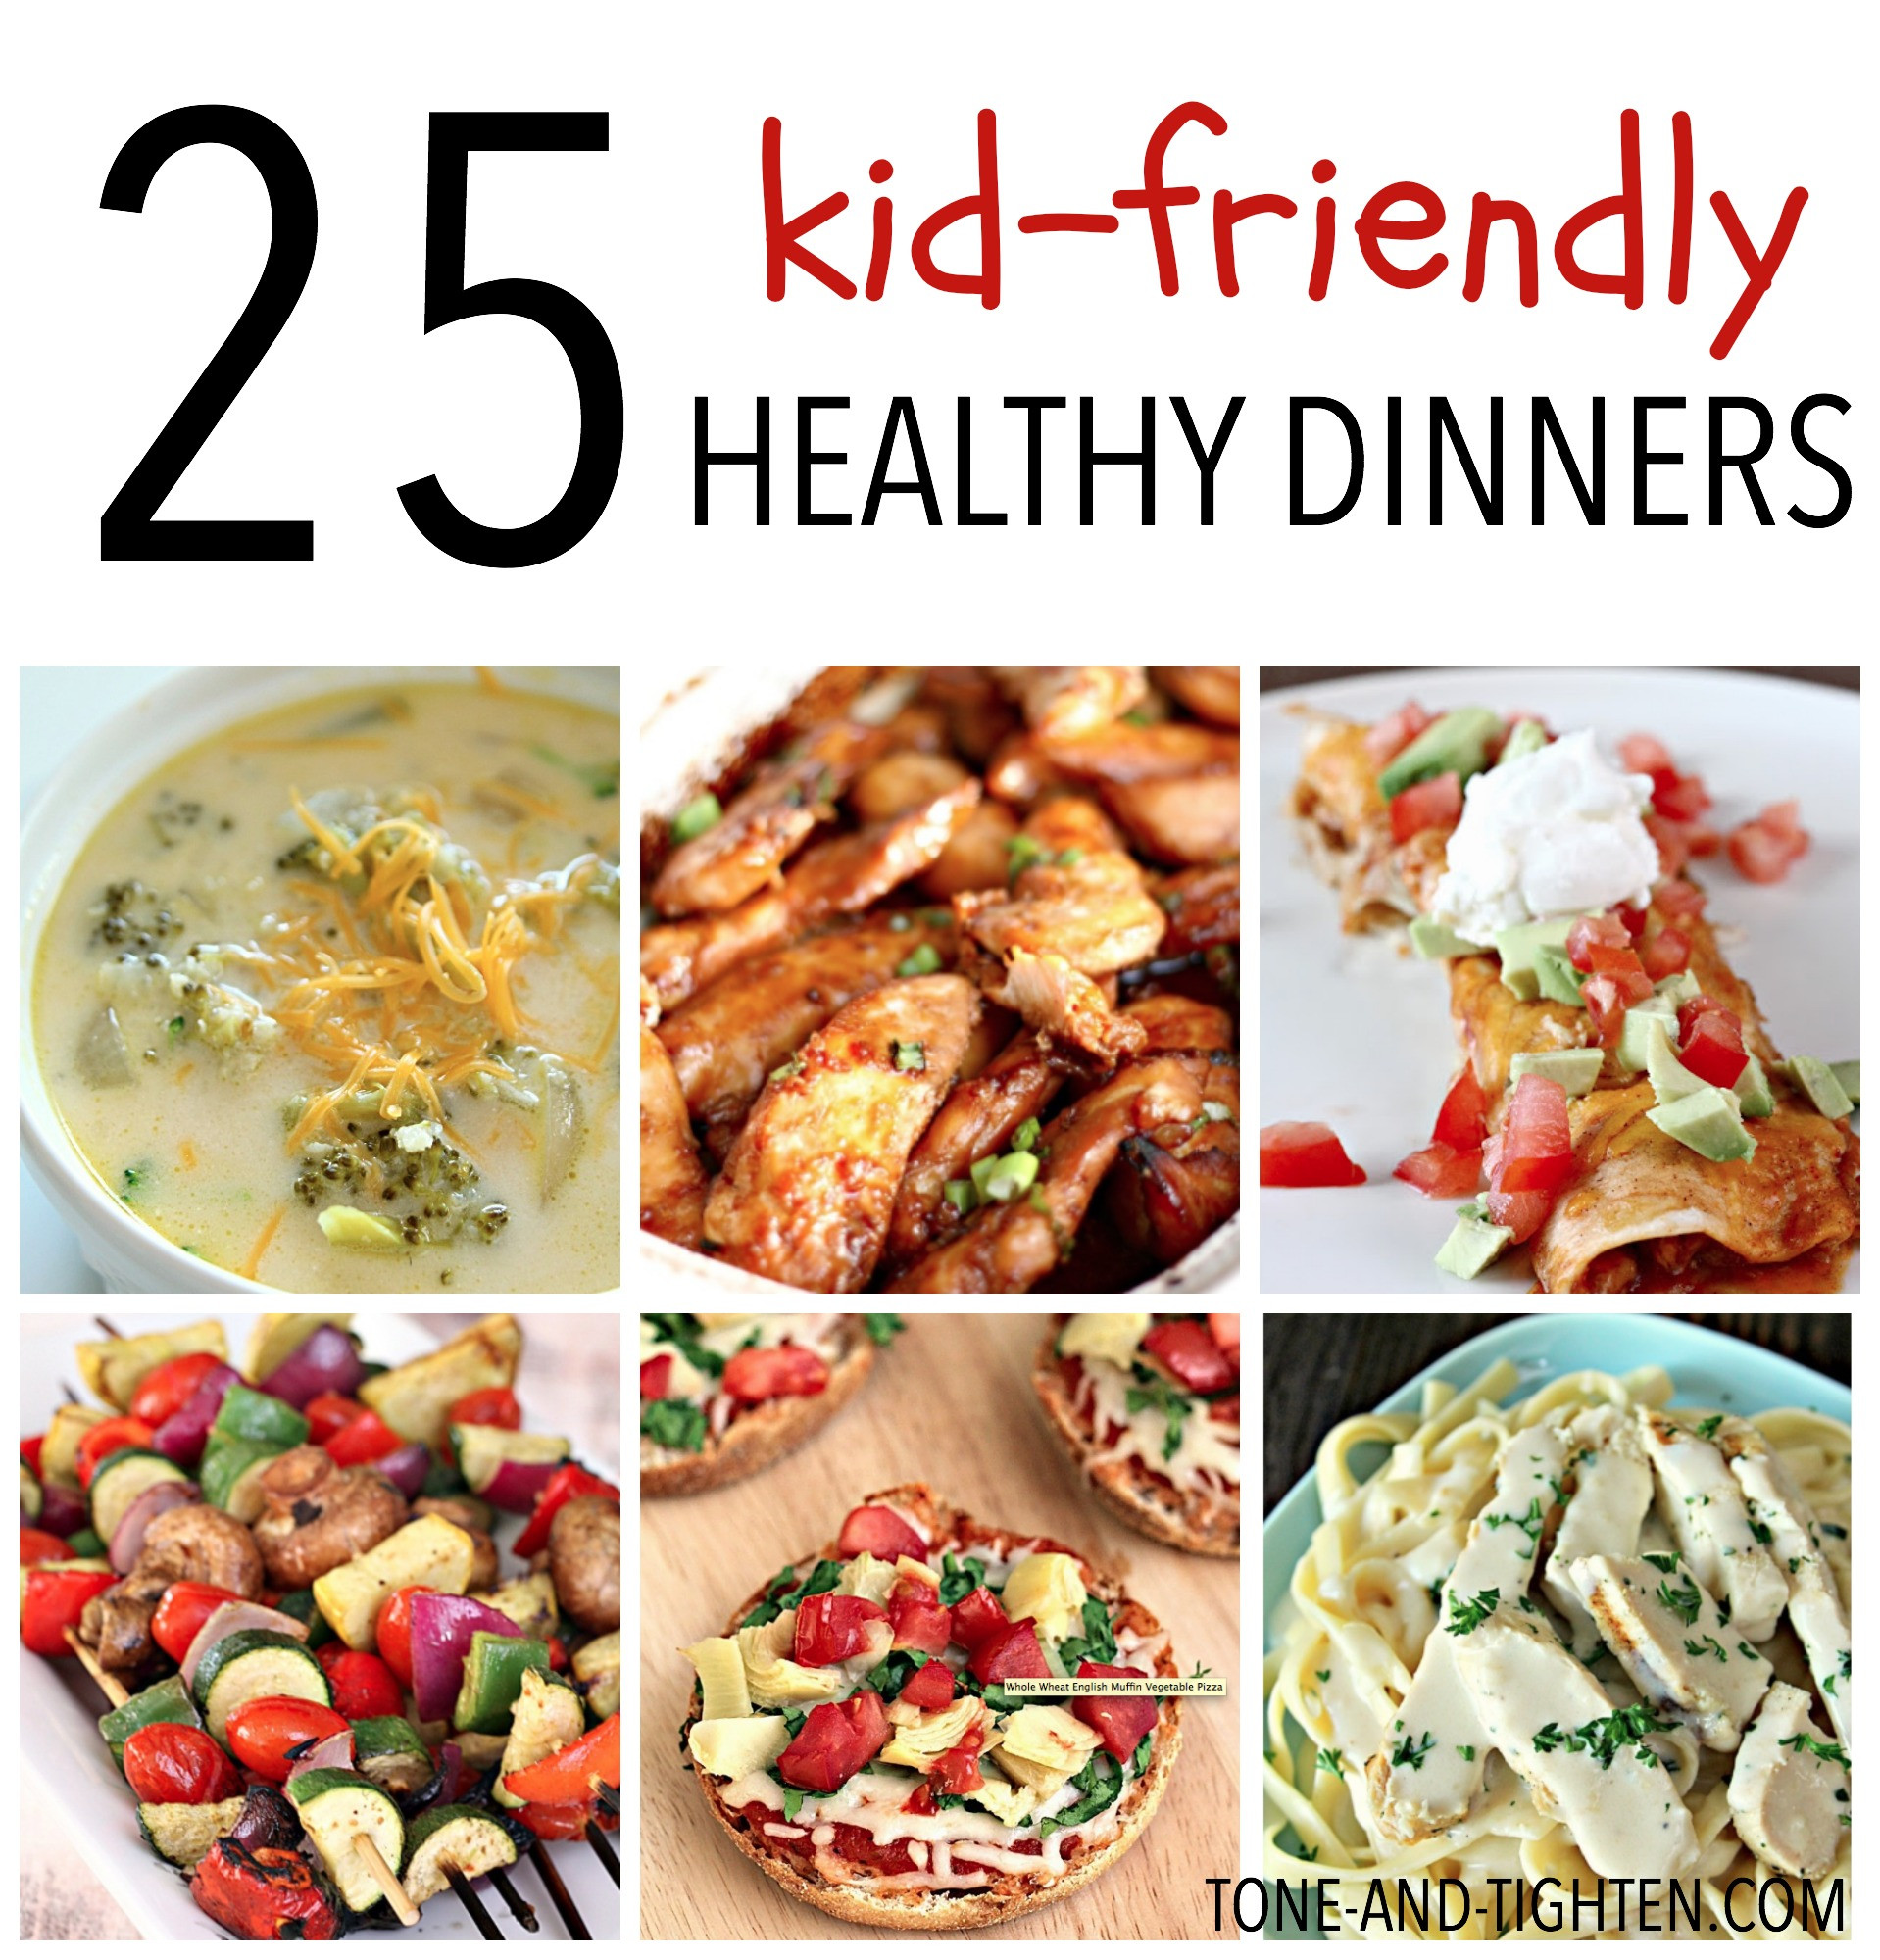 Fun Healthy Dinners For Kids
 25 Kid Friendly Healthy Dinners